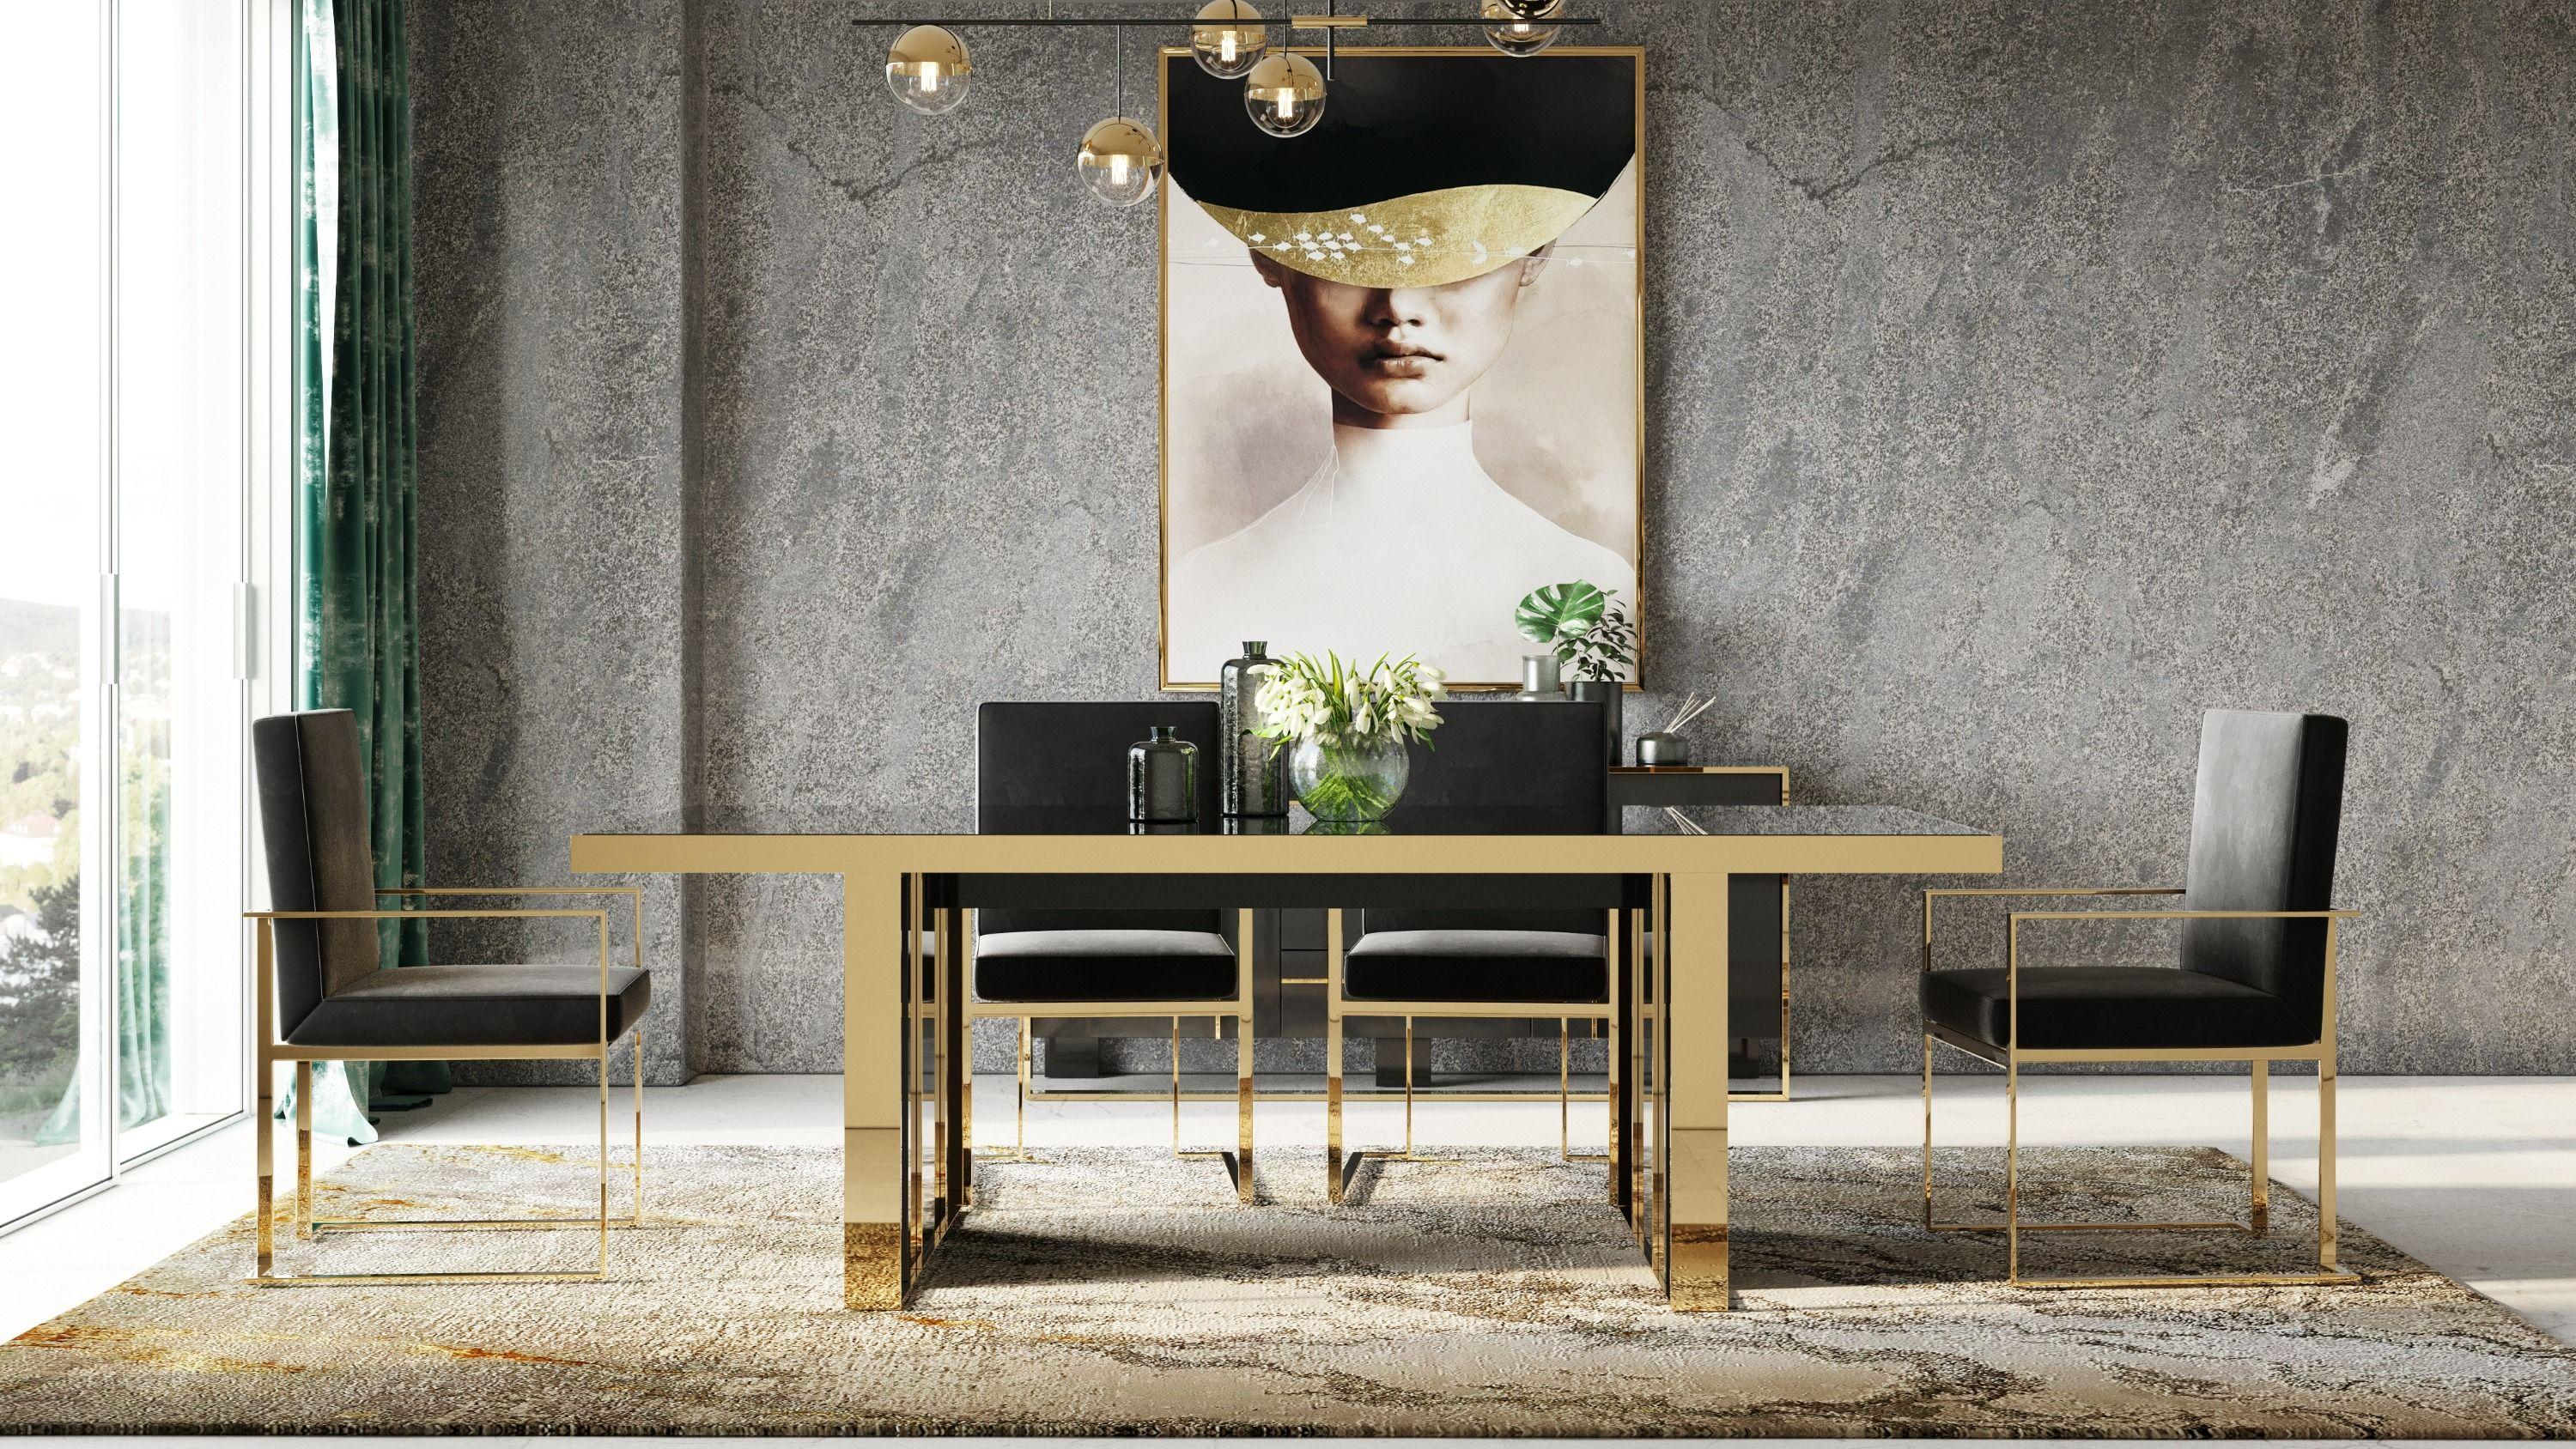 

    
VGVCT-A002-T Contemporary Black/Rosegold Stainless Steel Dining Table VIG Furniture Nova Domus VGVCT-A002
